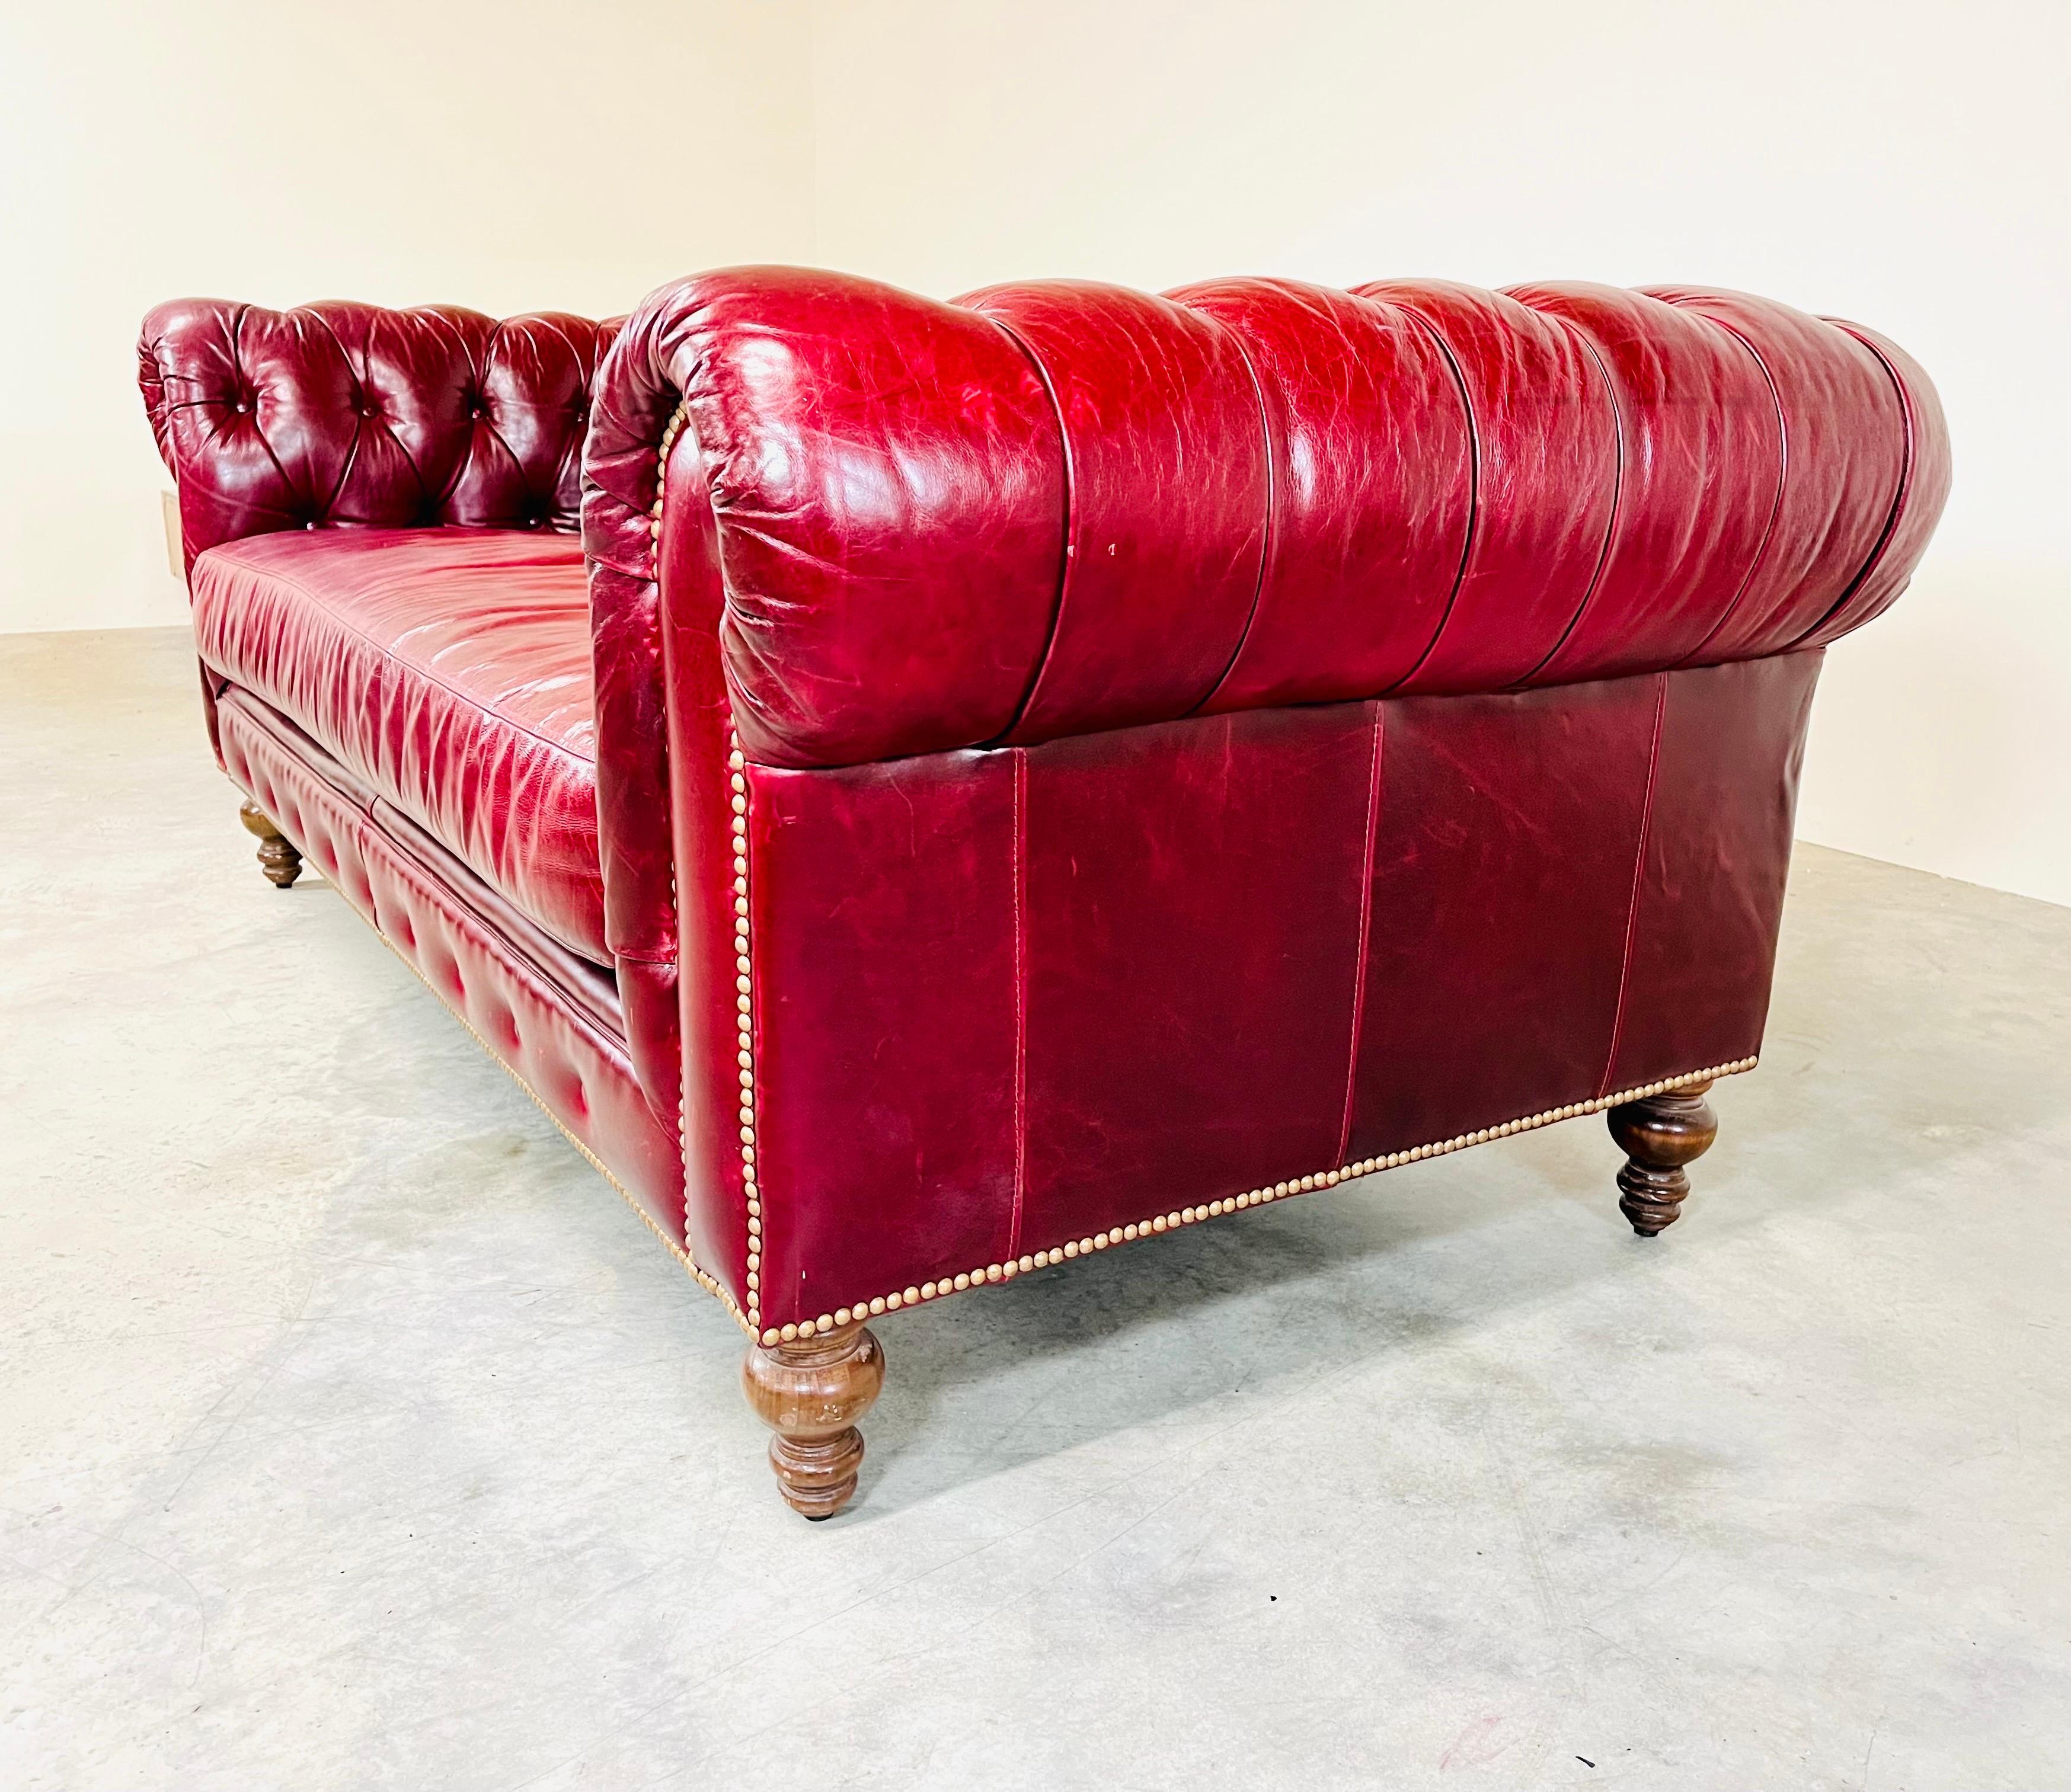 Turned English Style Chesterfield Cordovan Oxblood Tufted Leather Sofa